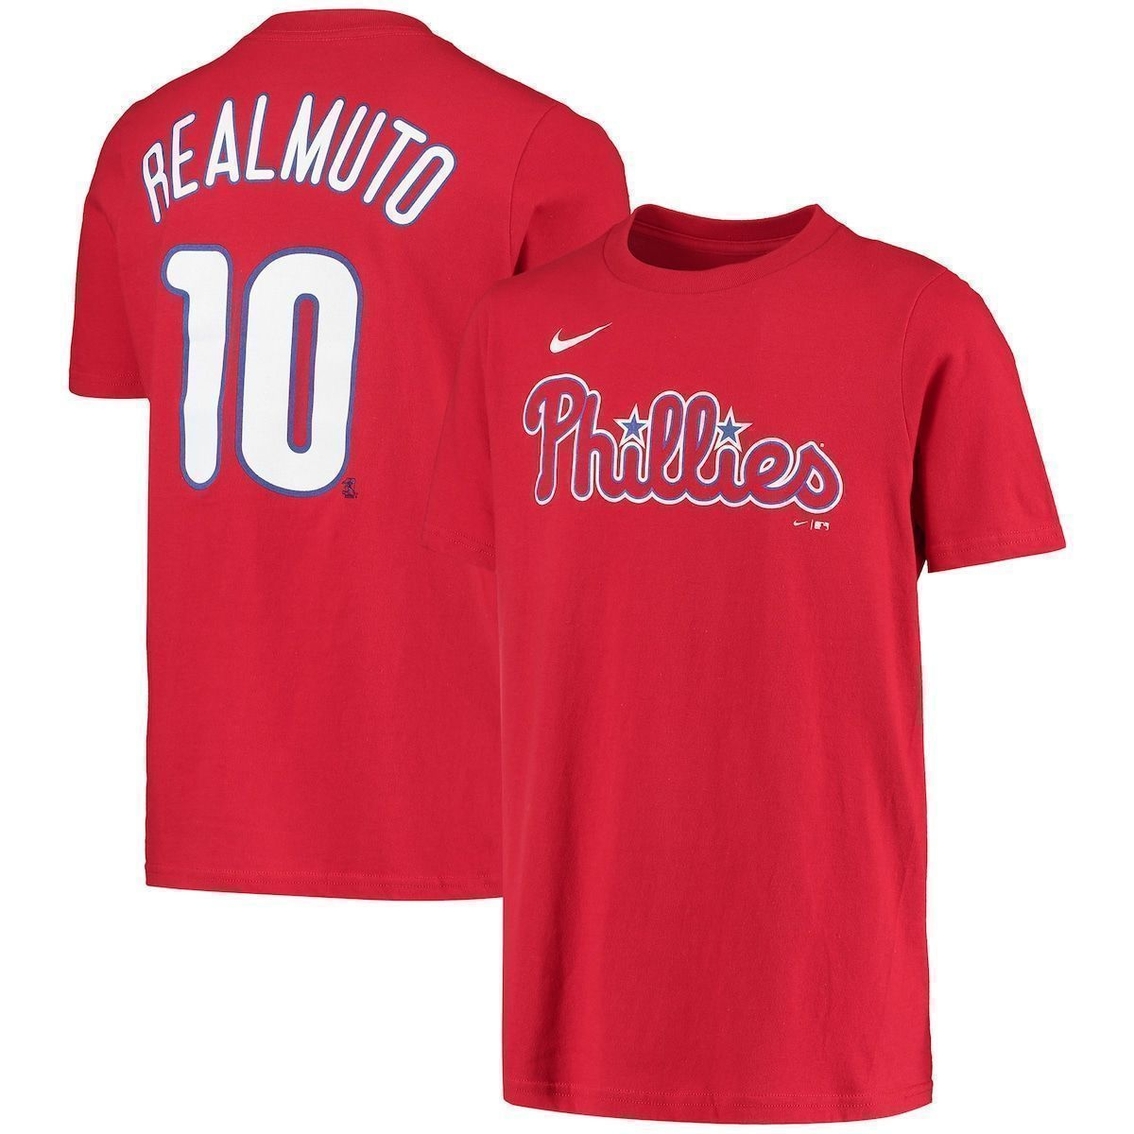 Youth Philadelphia Phillies JT Realmuto Nike Red Name & Number T-Shirt